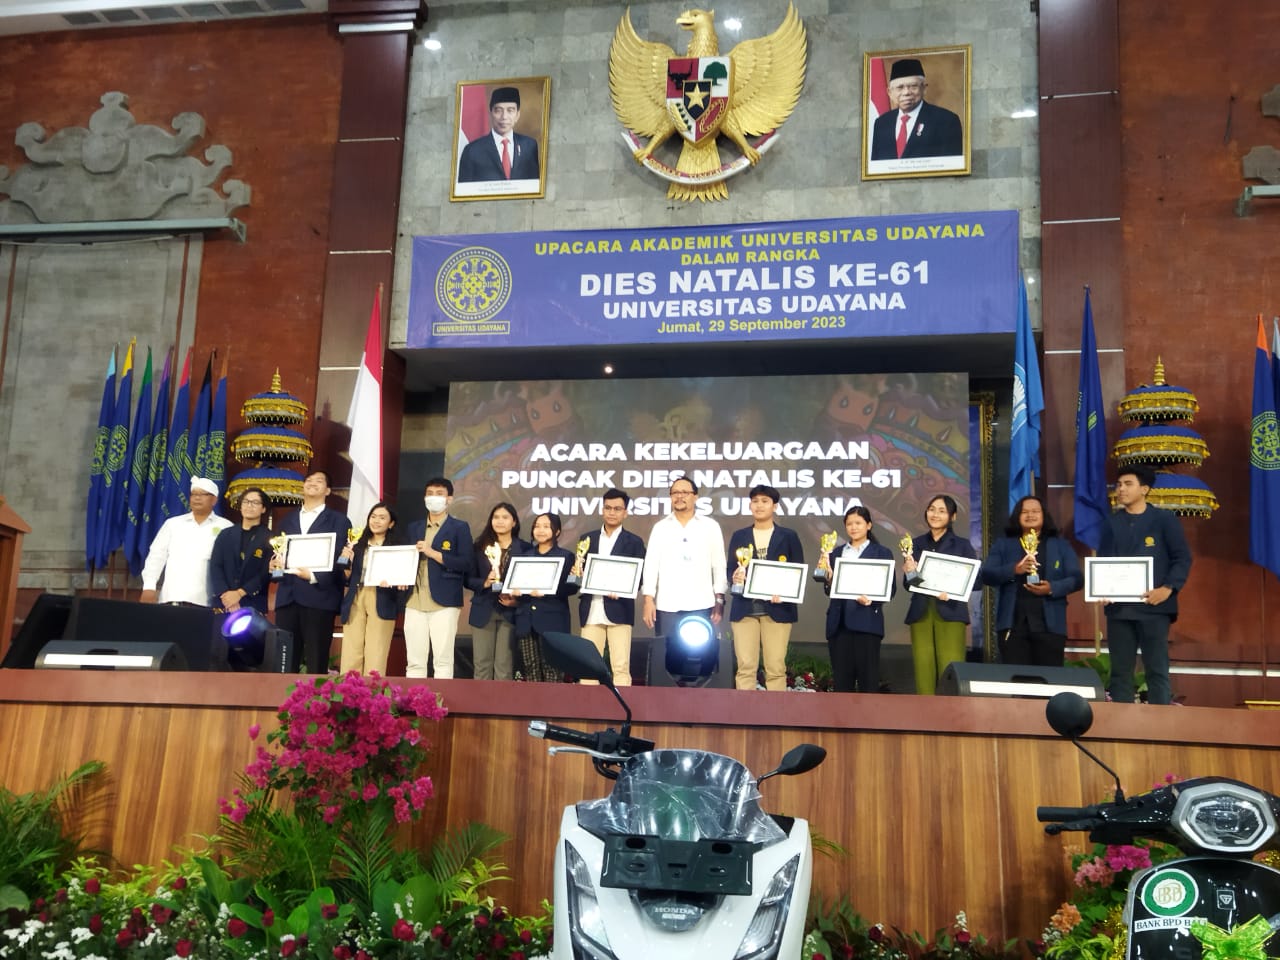 FMIPA is proud, its study program achieved Chancellor's Awards on the 61st Anniversary of Udayana University